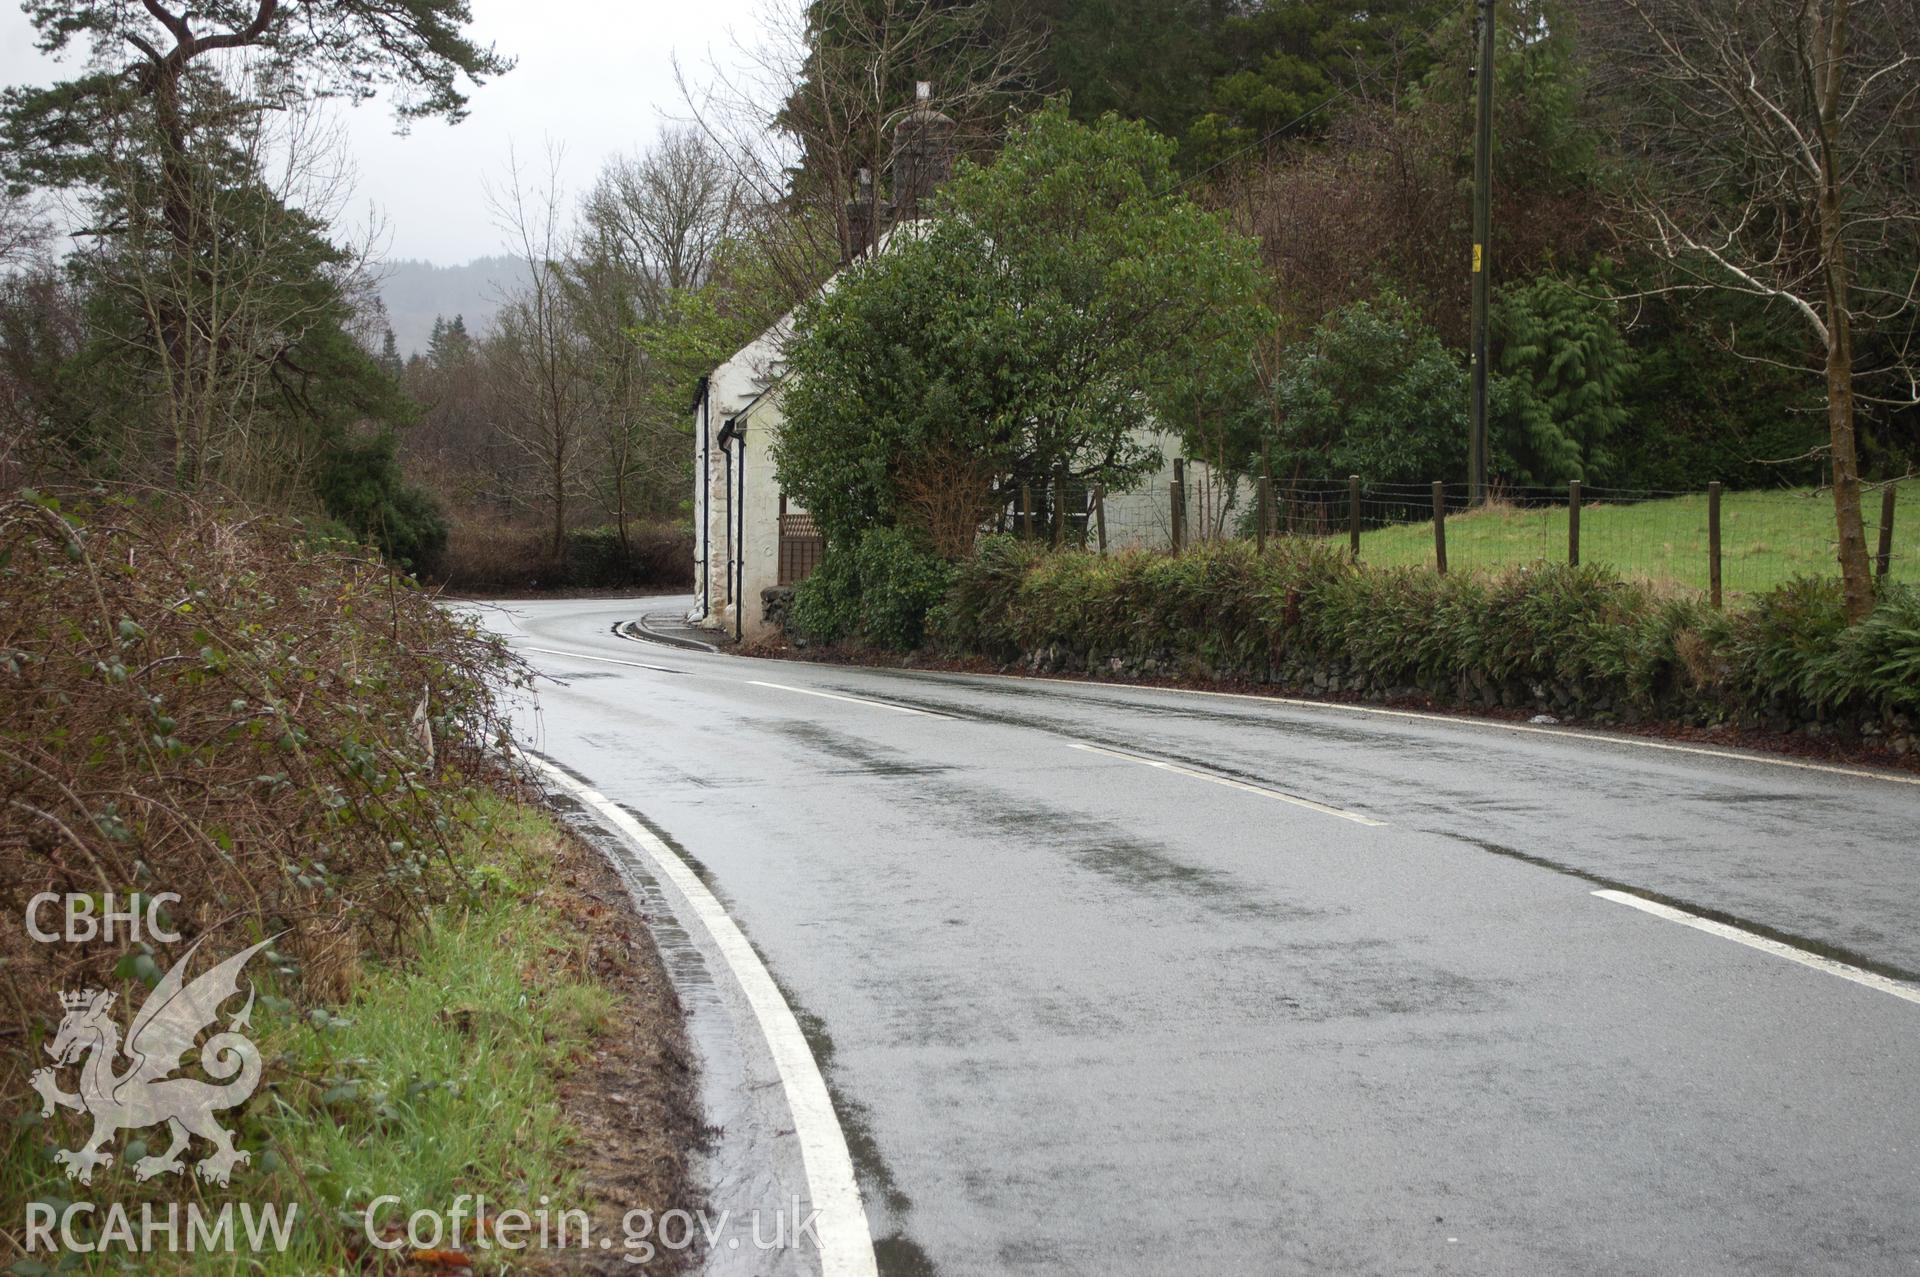 Marian Mawr archaeological assessment; section B-C, view from W showing view along street showing pipeline route in pavement,  taken by Robert Evans of Gwynedd Archaeological Trust, 5th February 2016.